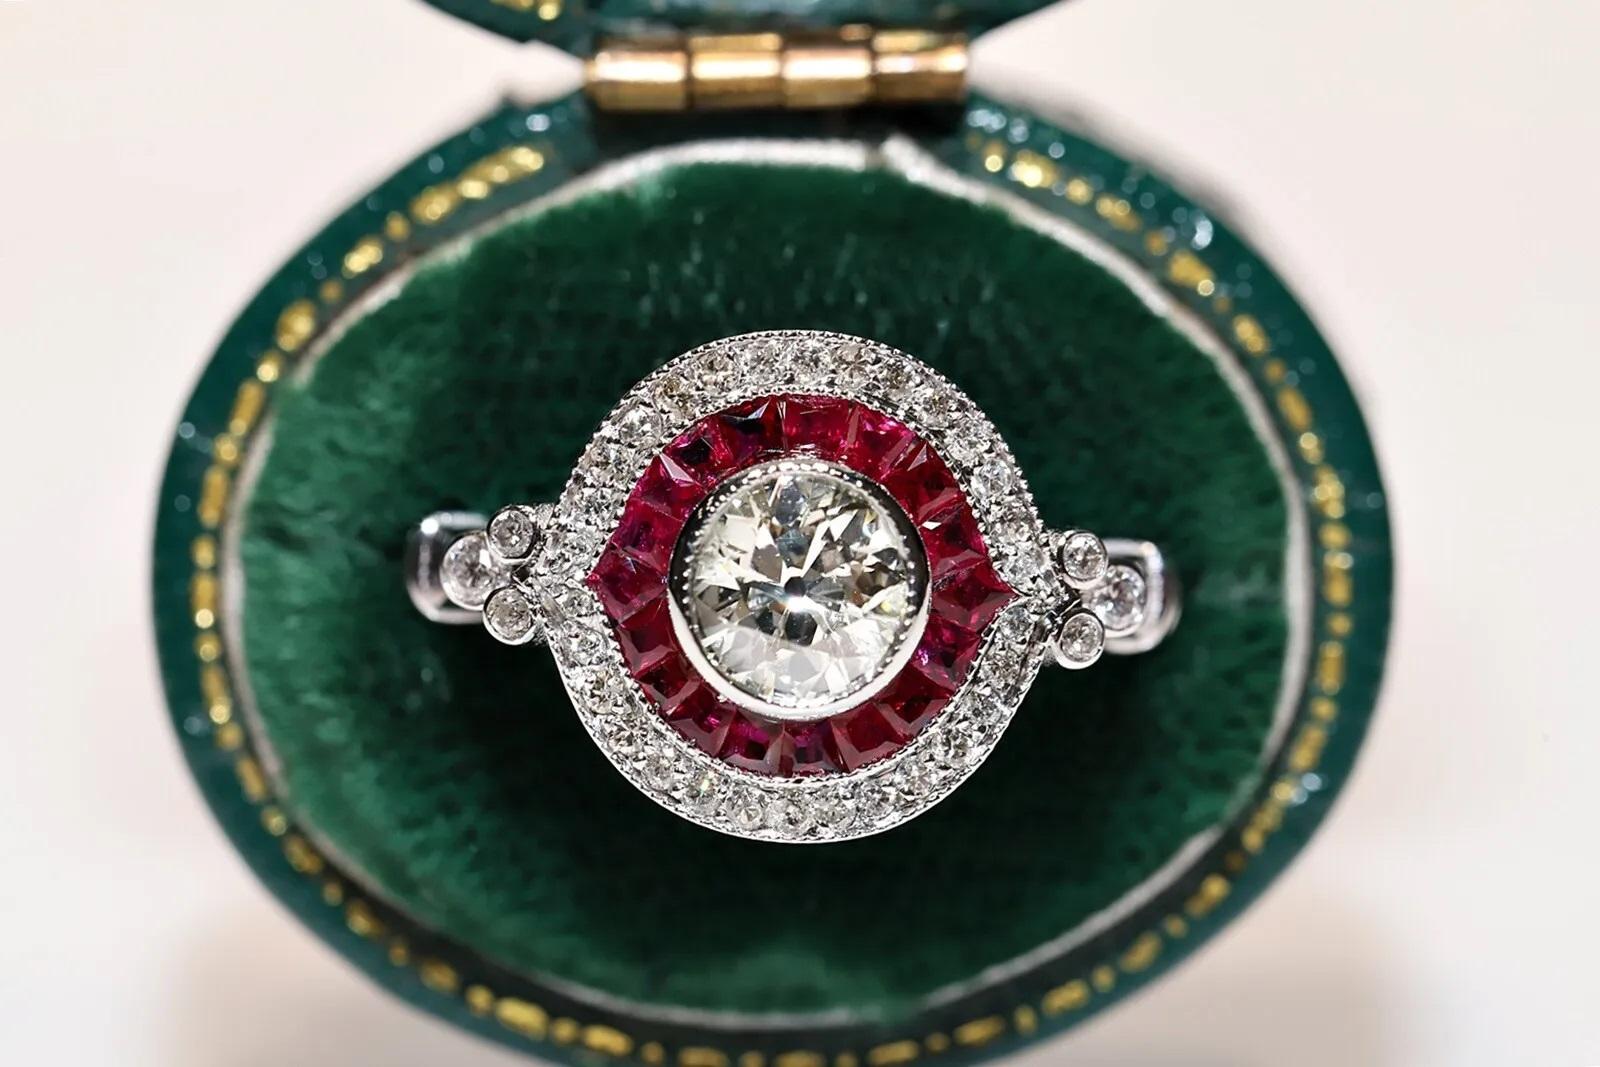 In very good condition.
Total weight is 5.4 grams.
Totally is center diamond 0.72 carat.
The diamond is has G-H color and s2 clarity.
All diamond is totally 0.99 carat.
Totally is caliber ruby 0.75 carat.
Box is not included.
Ring size is US 6.5 (We